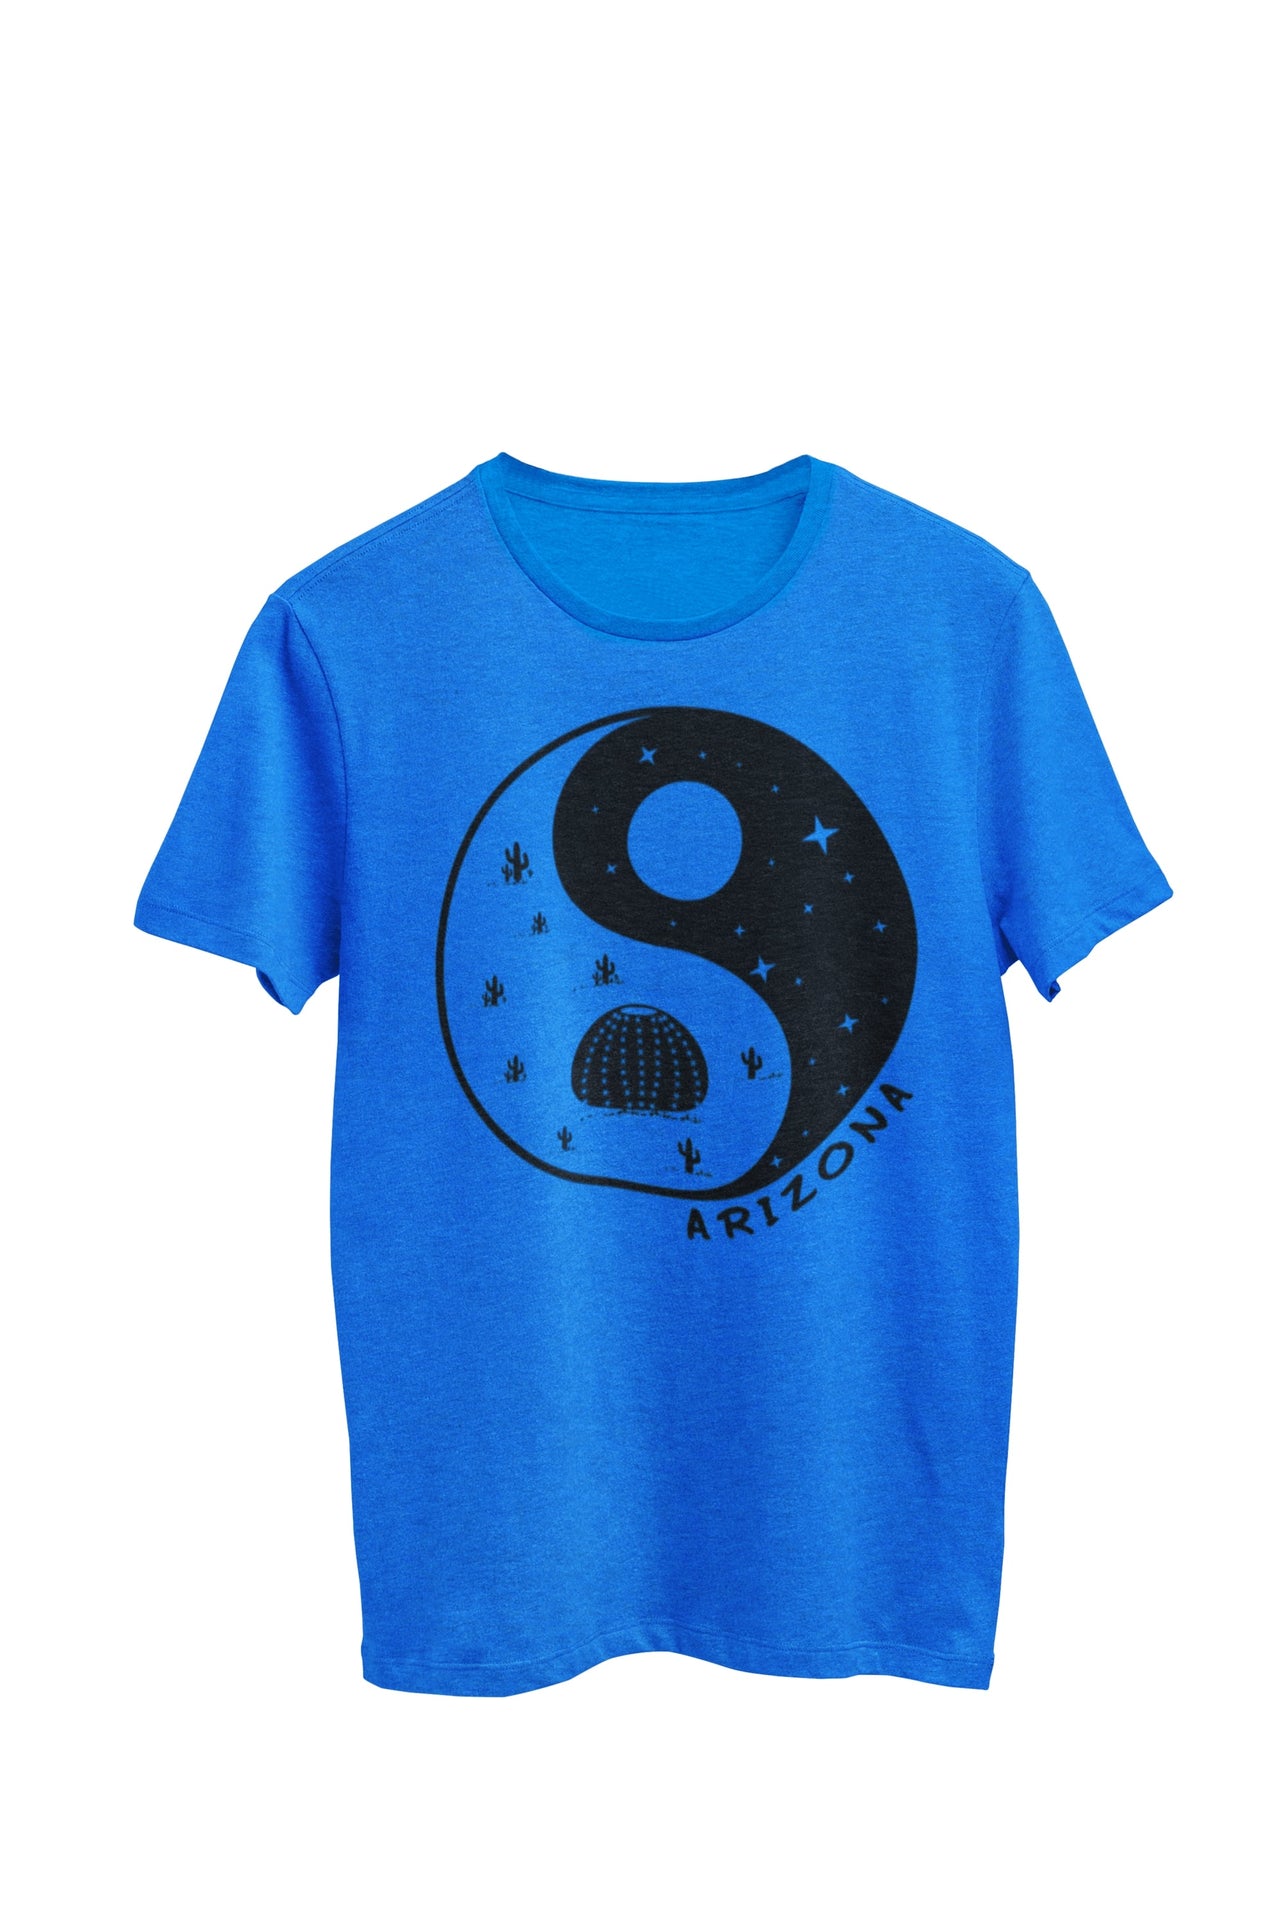 Royal blue heather unisex t-shirt featuring a Yin and Yang symbol with drawings of cacti in night and day. Designed by WooHoo Apparel